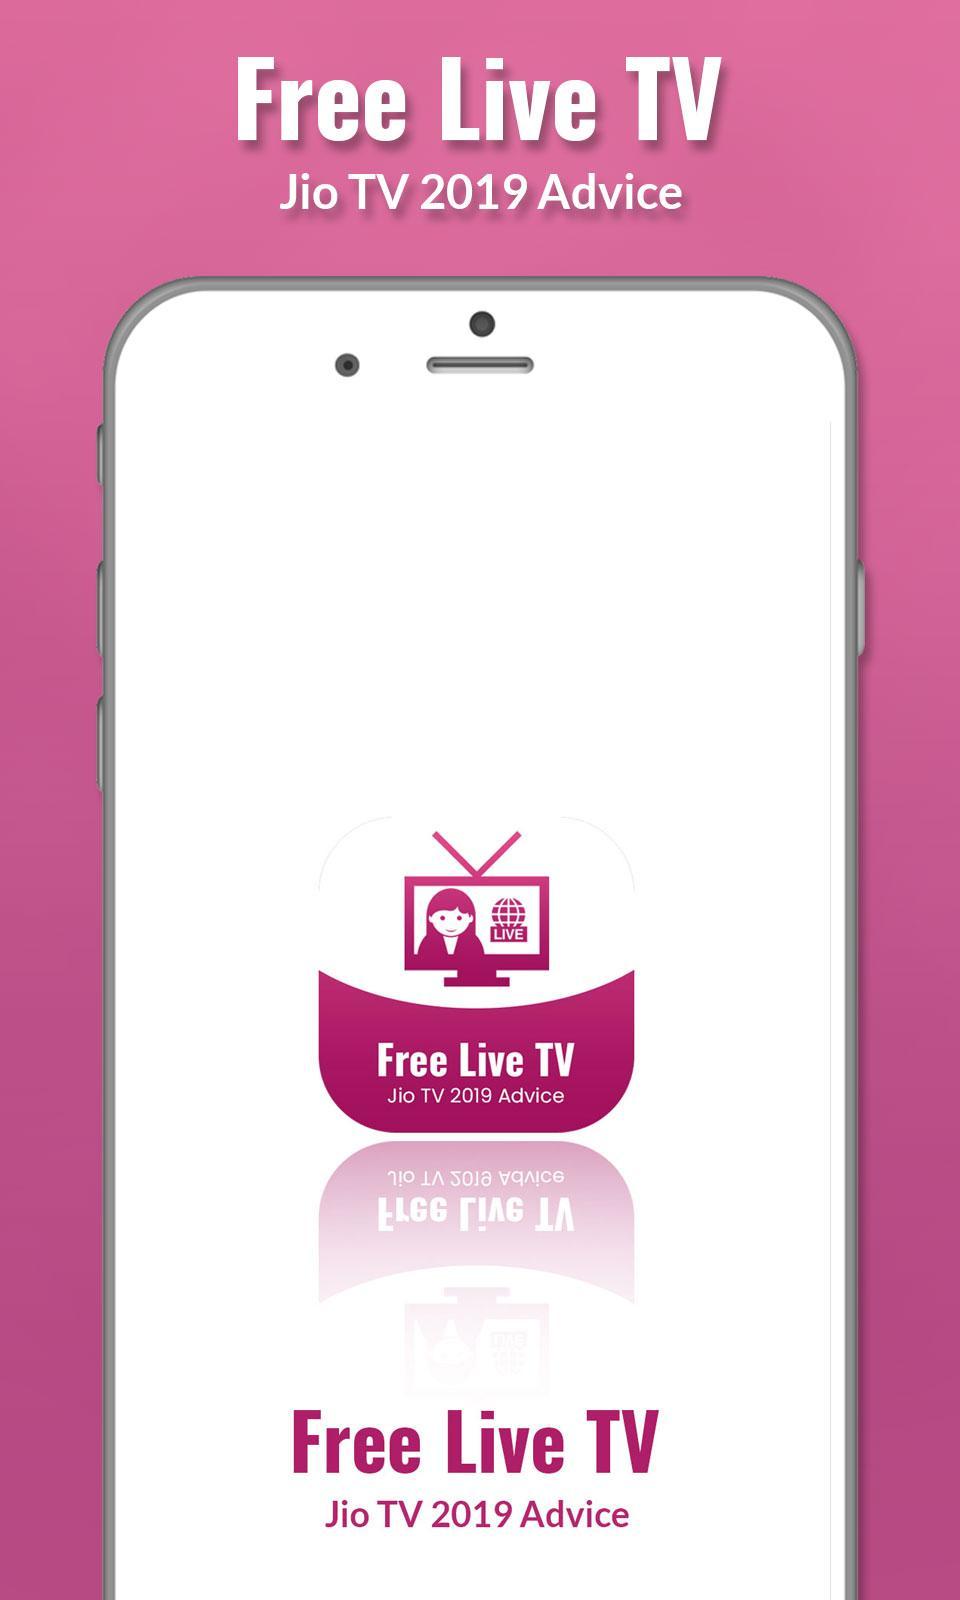 Free Live Online TV - Jio TV 2019 Advice for Android - APK Download